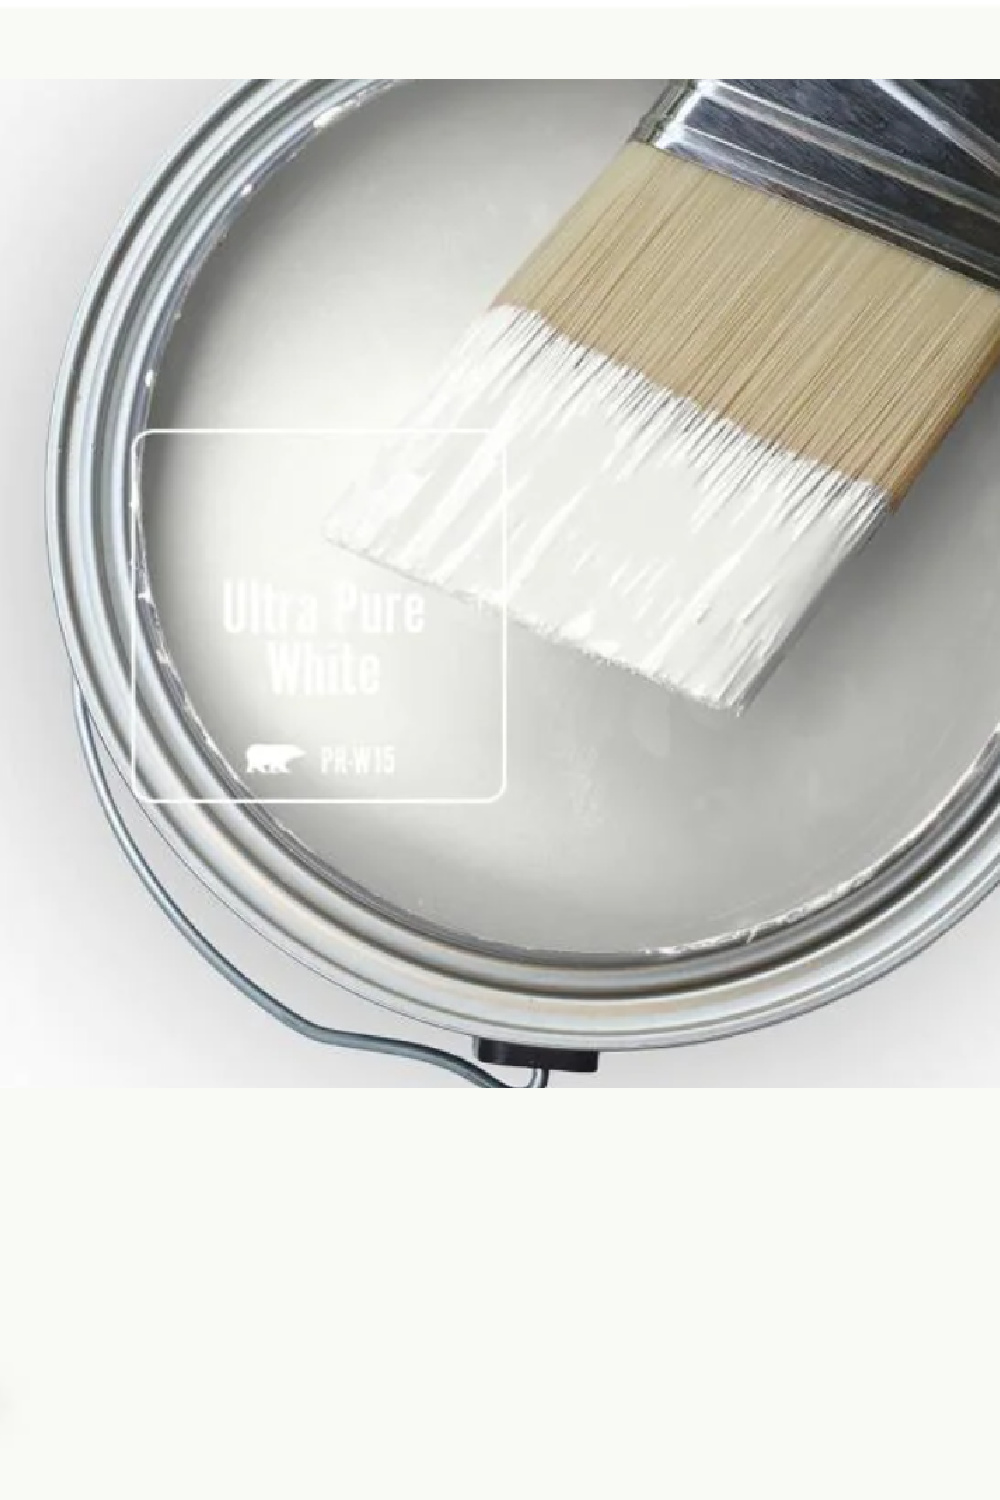 Behr Ultra Pure White paint color is a gorgeous bright cool white with minimal undertones since it is their base that all the other whites begin with. #ultrapurewhite #bestwhitepaintcolors